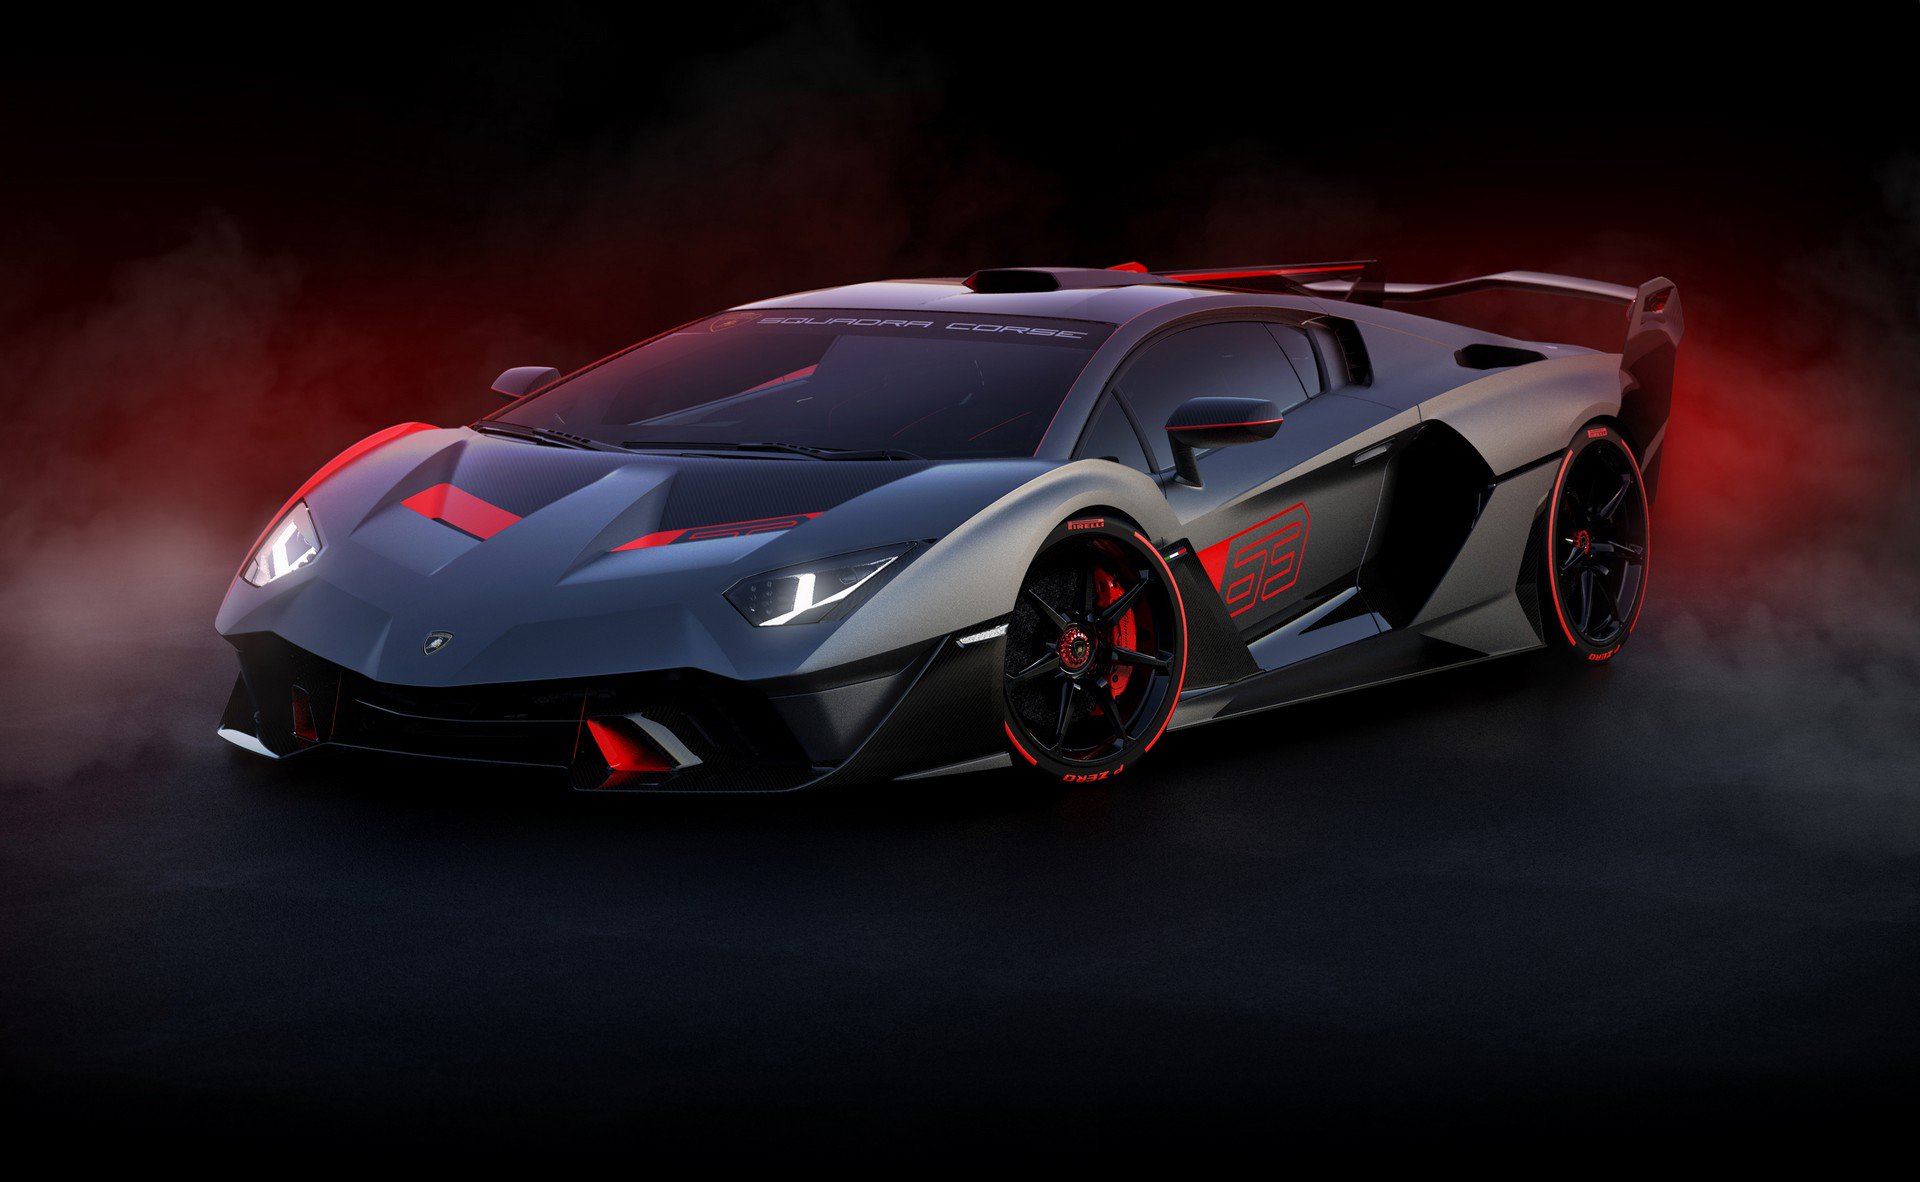 Lamborghini Gears Up to Revisit its Huracán STO Model in NFT Avatar  Details Here  Technology News